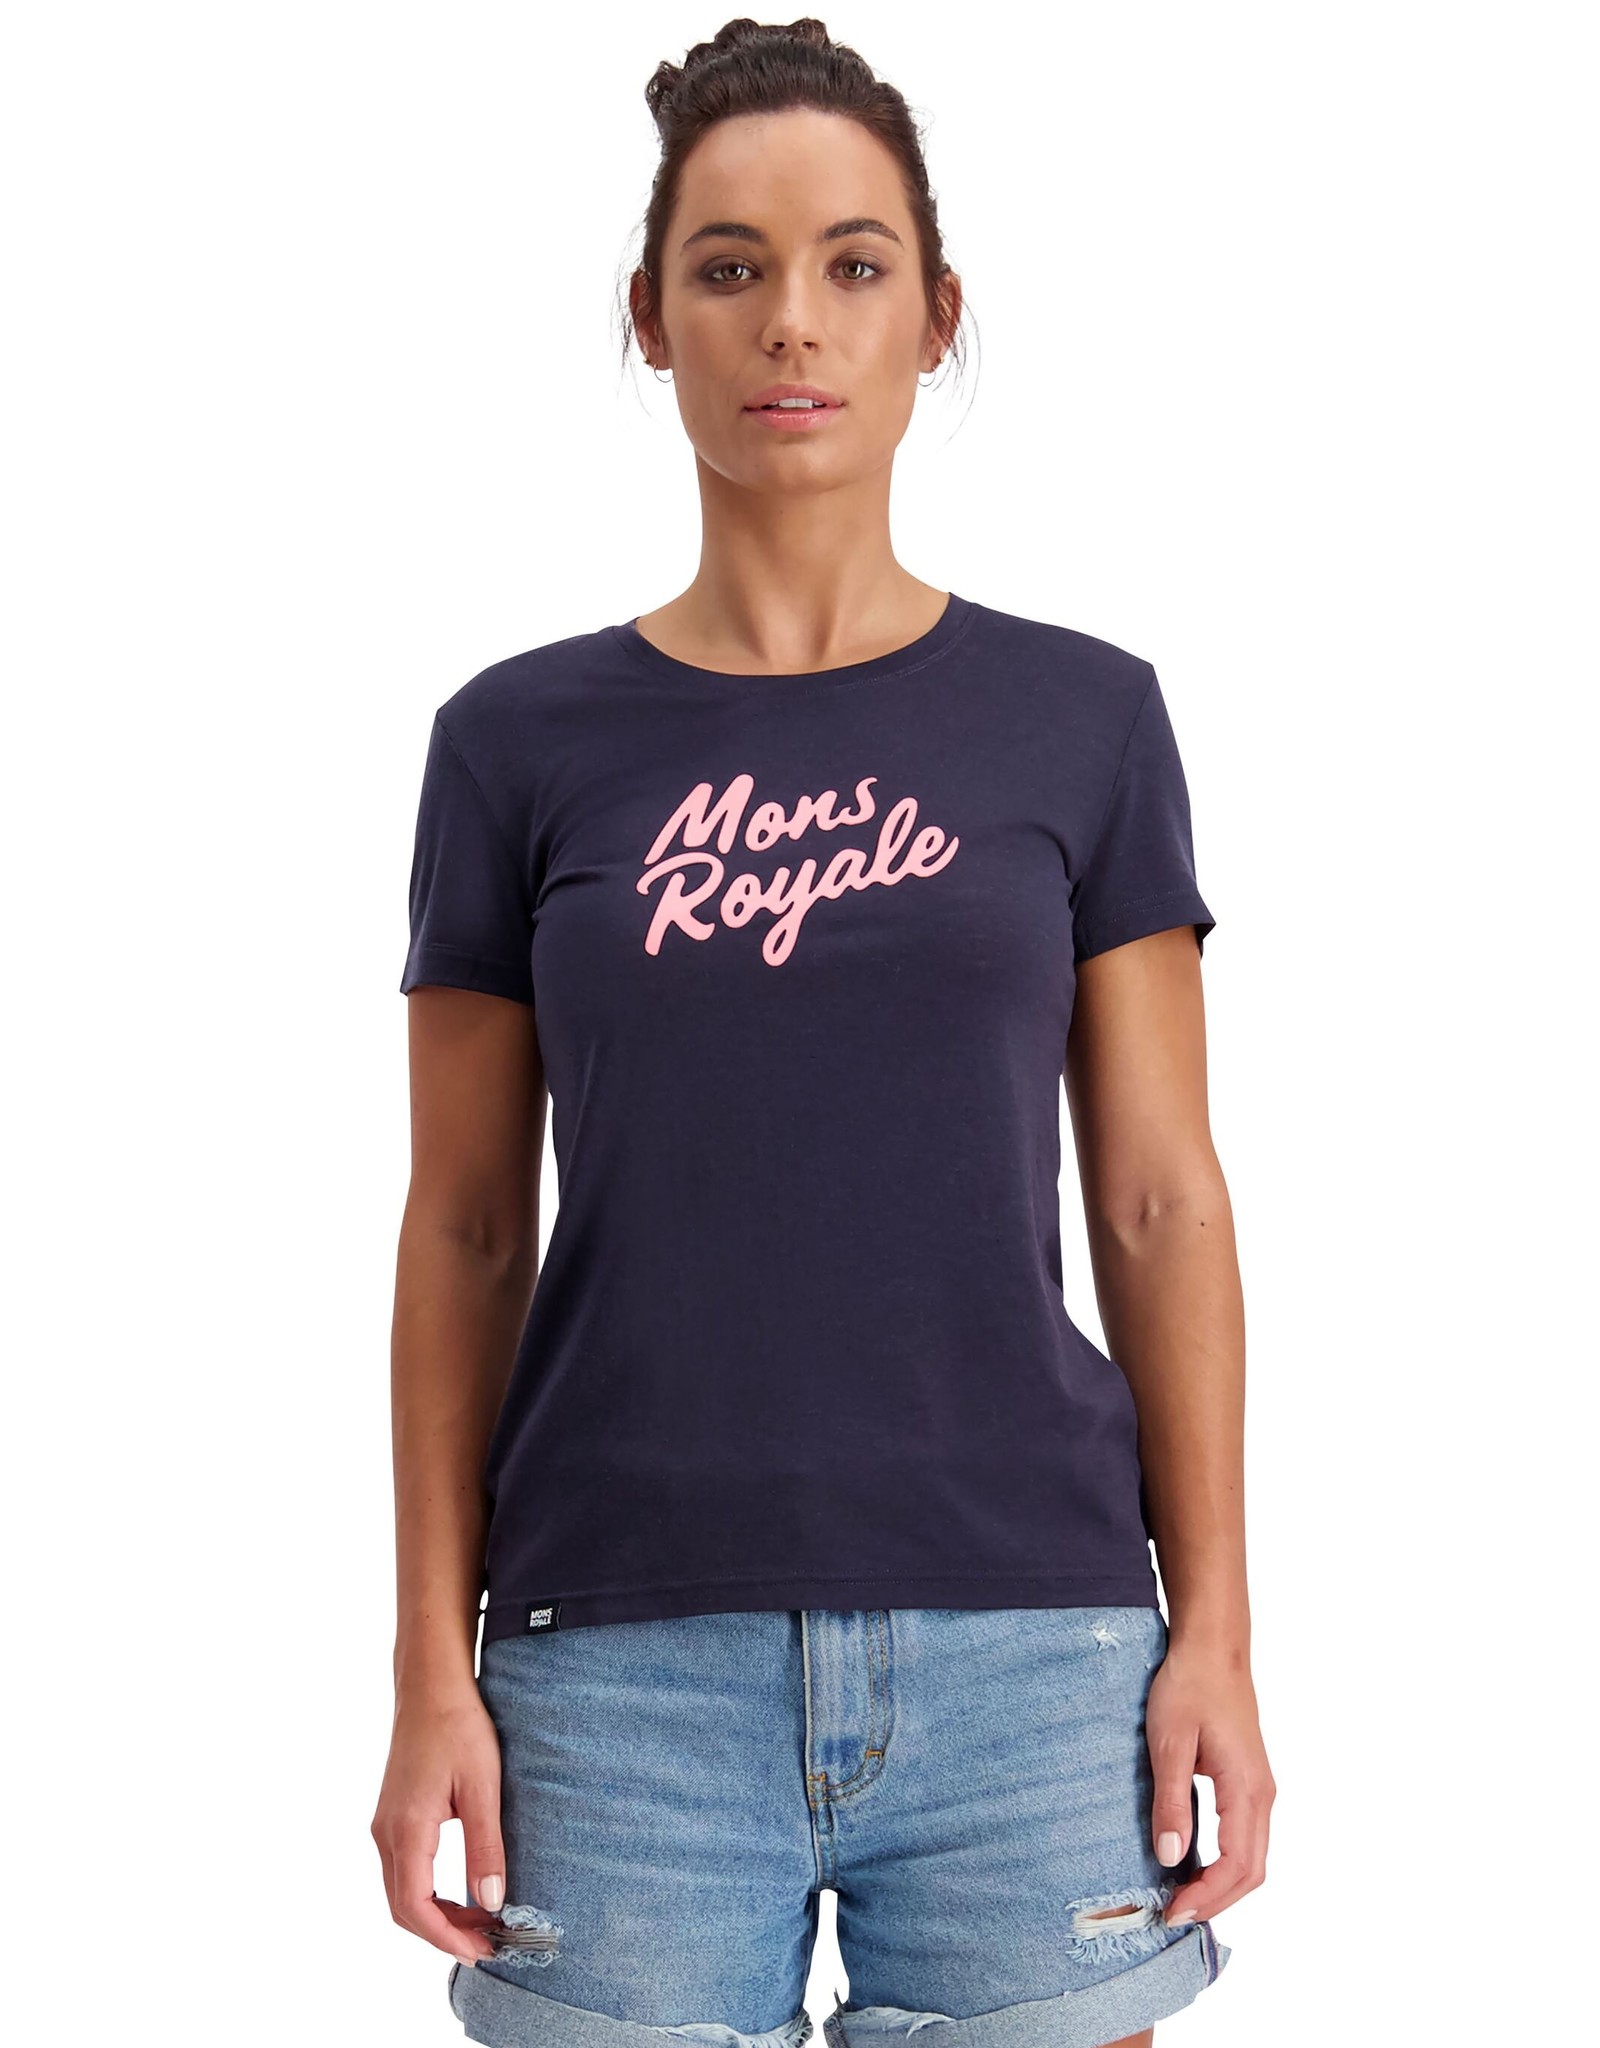 Mons Royale Mons Royale Women's Icon Tee -S2020